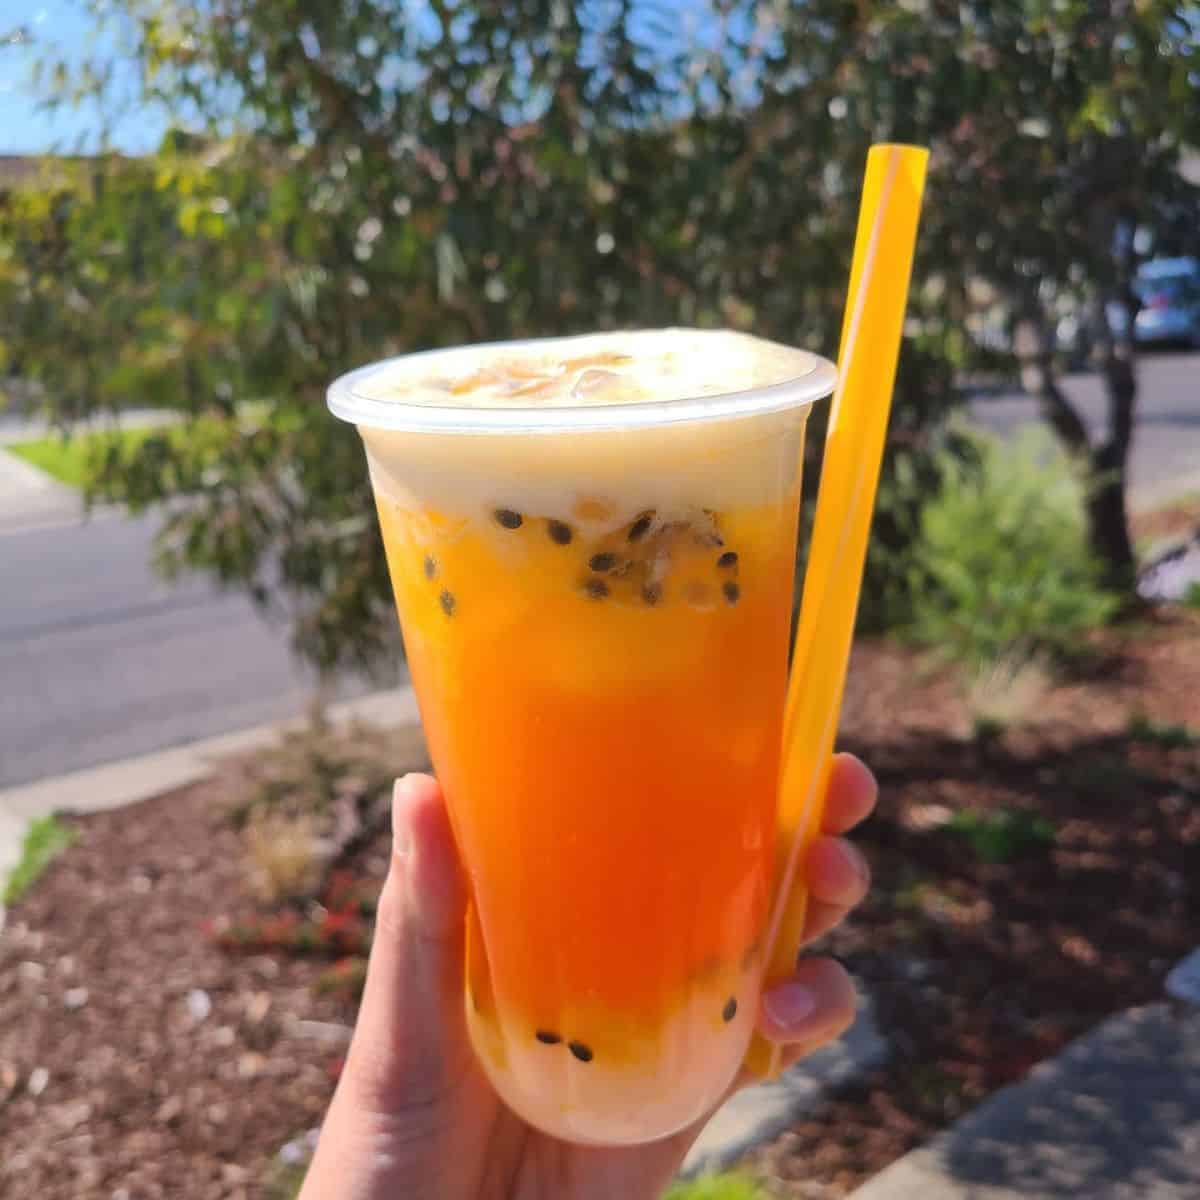  A hand holding an orange refreshment in a plastic cup with yellow straw on the roadside.